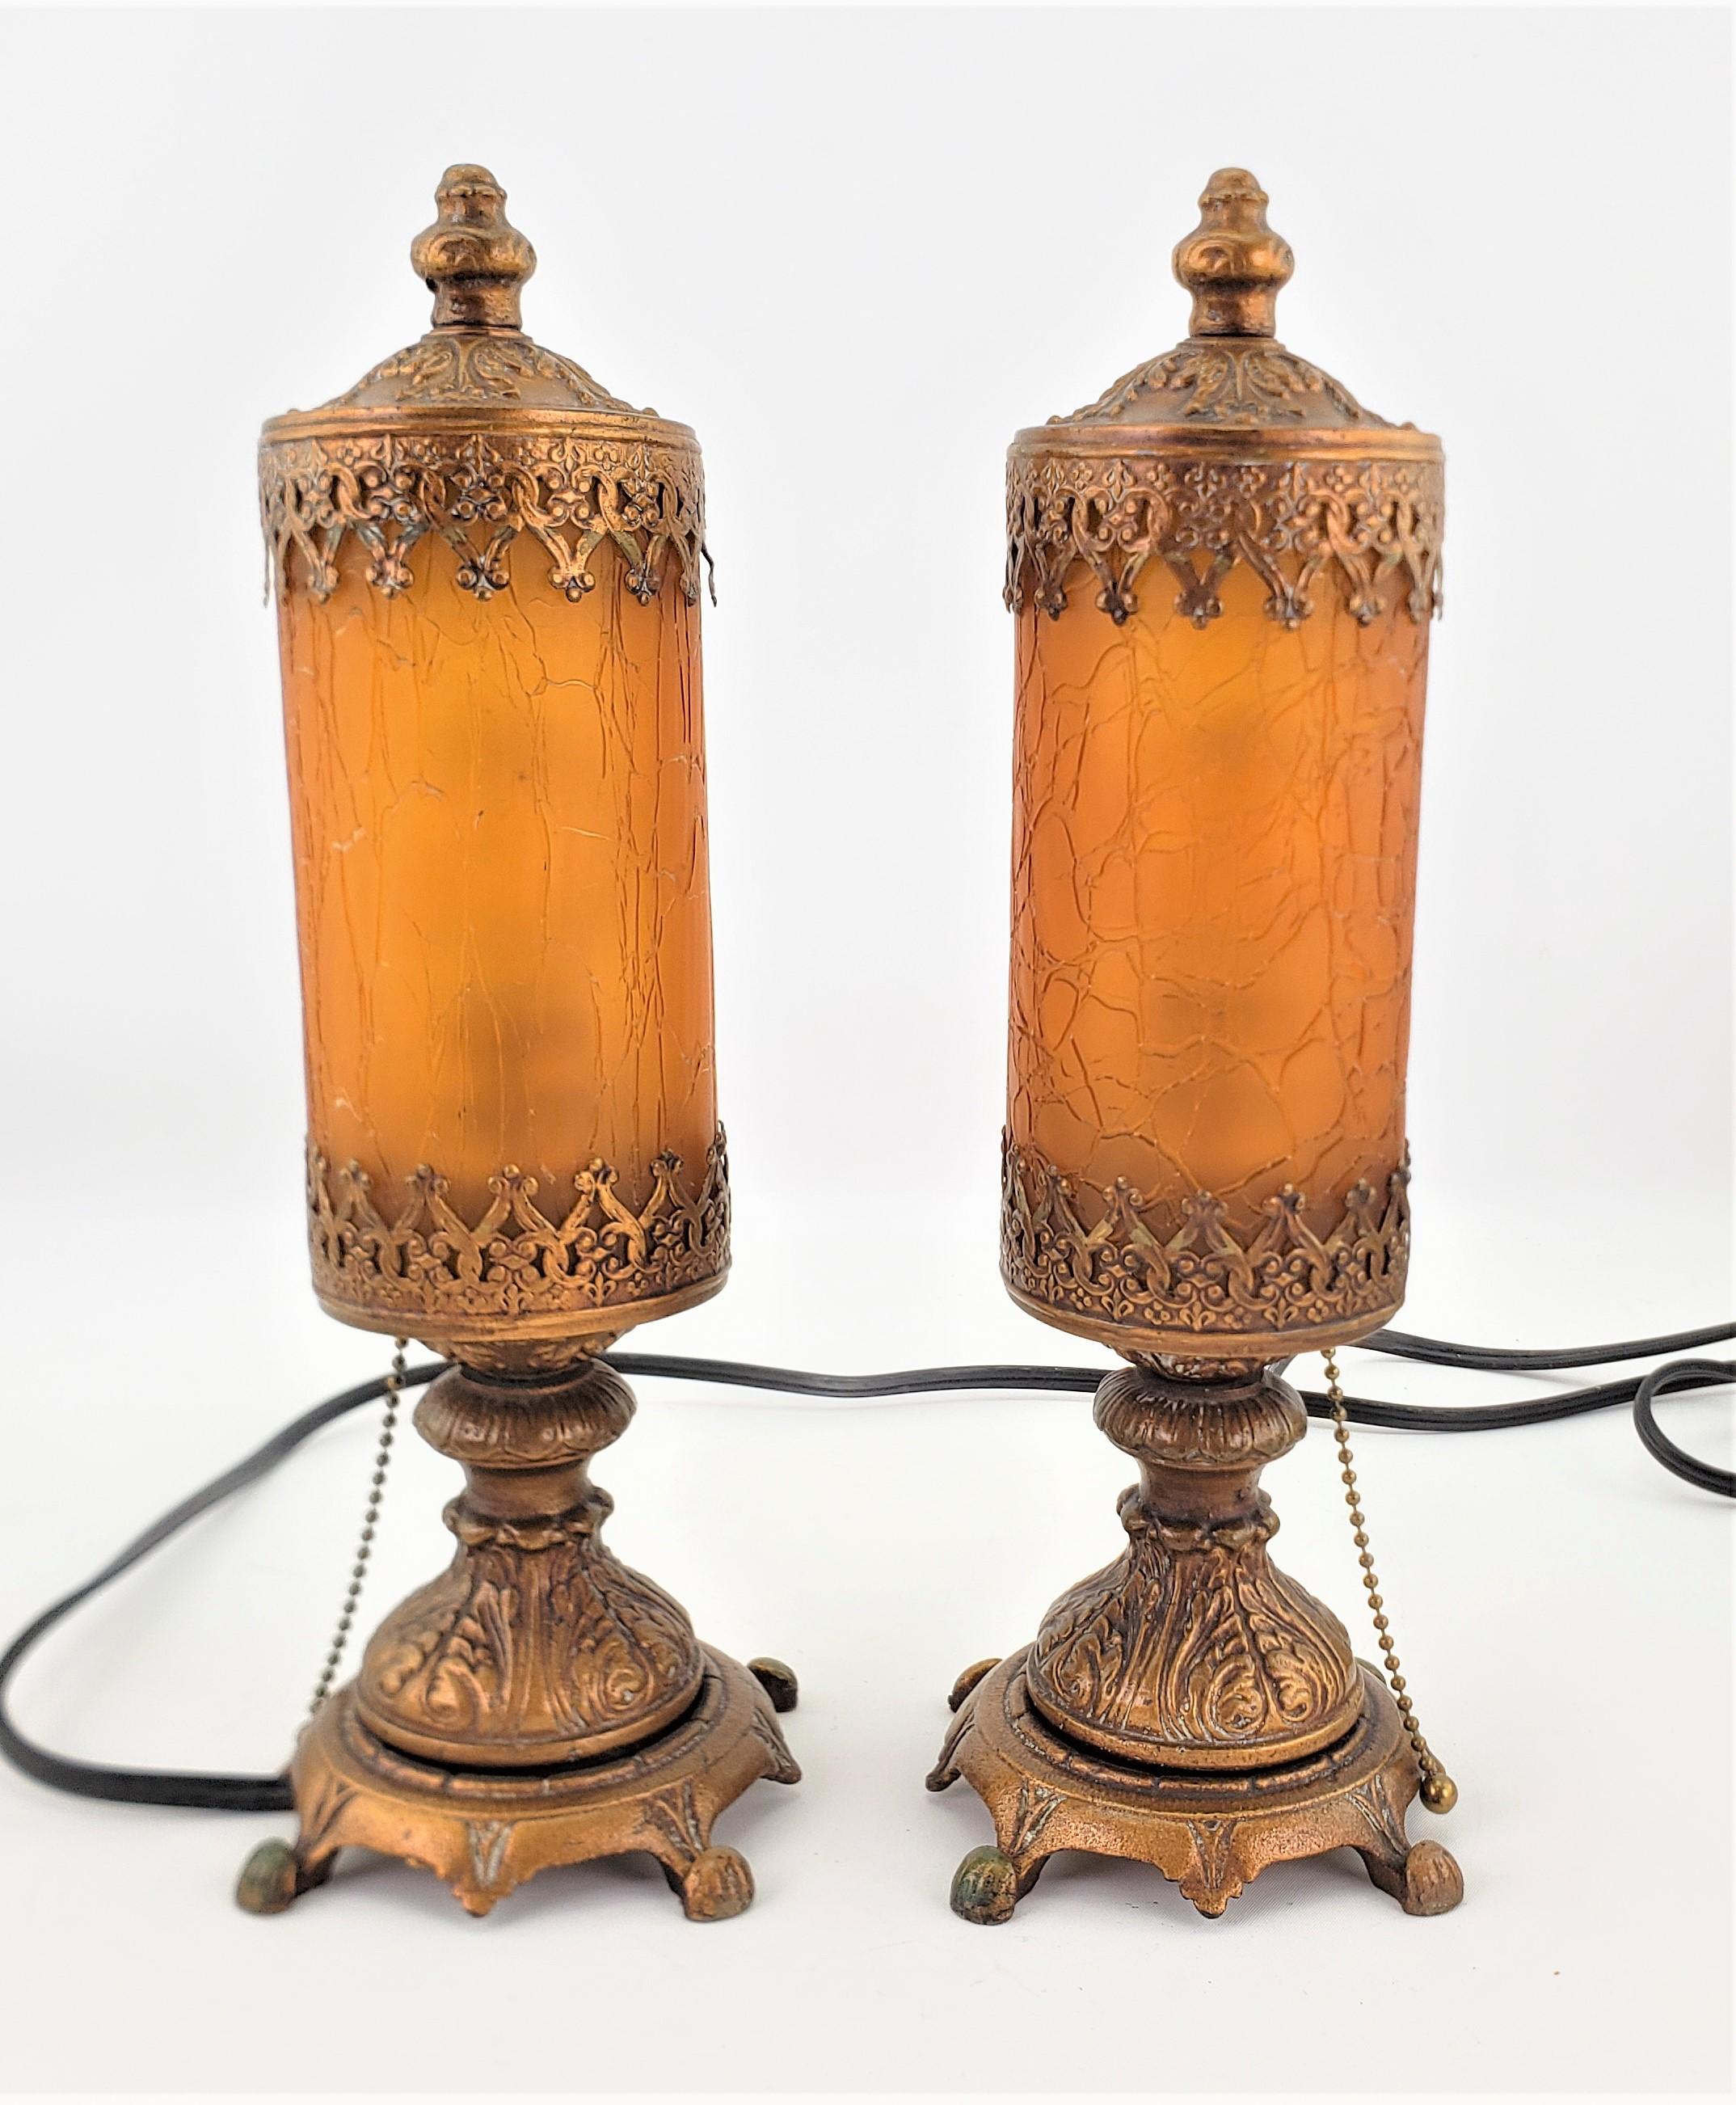 Victorian Pair of Antique Styled Accent or Boudoir Table Lamps with Crackle Glass Shades